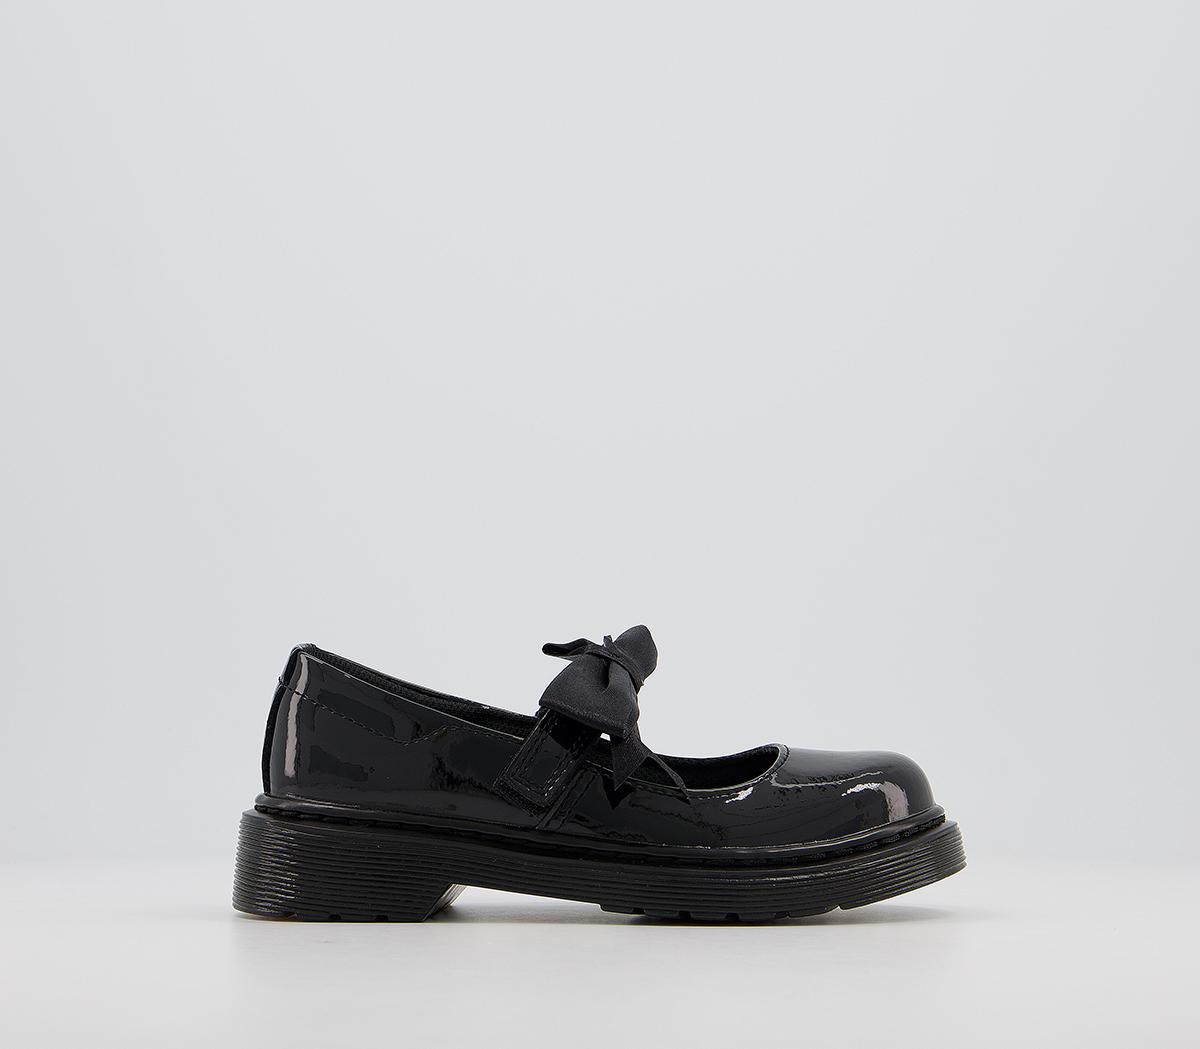 Dr. MartensMaccy Ii Bow Mary Jane Jnr ShoesBlack Patent Leather